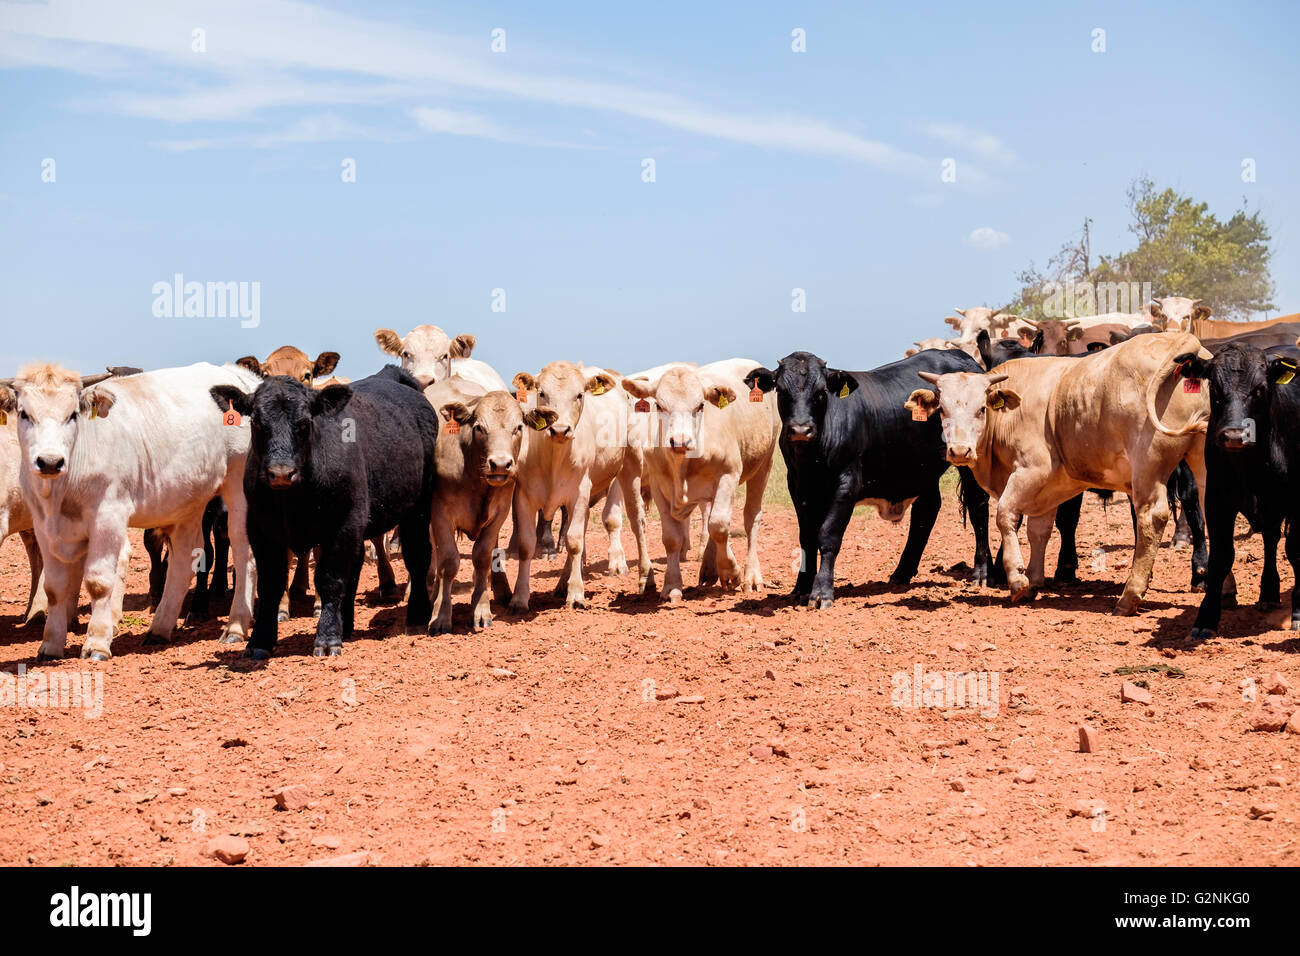 A small herd of cattle of different breeds stare toward the photographer in Oklahoma, USA. Stock Photo